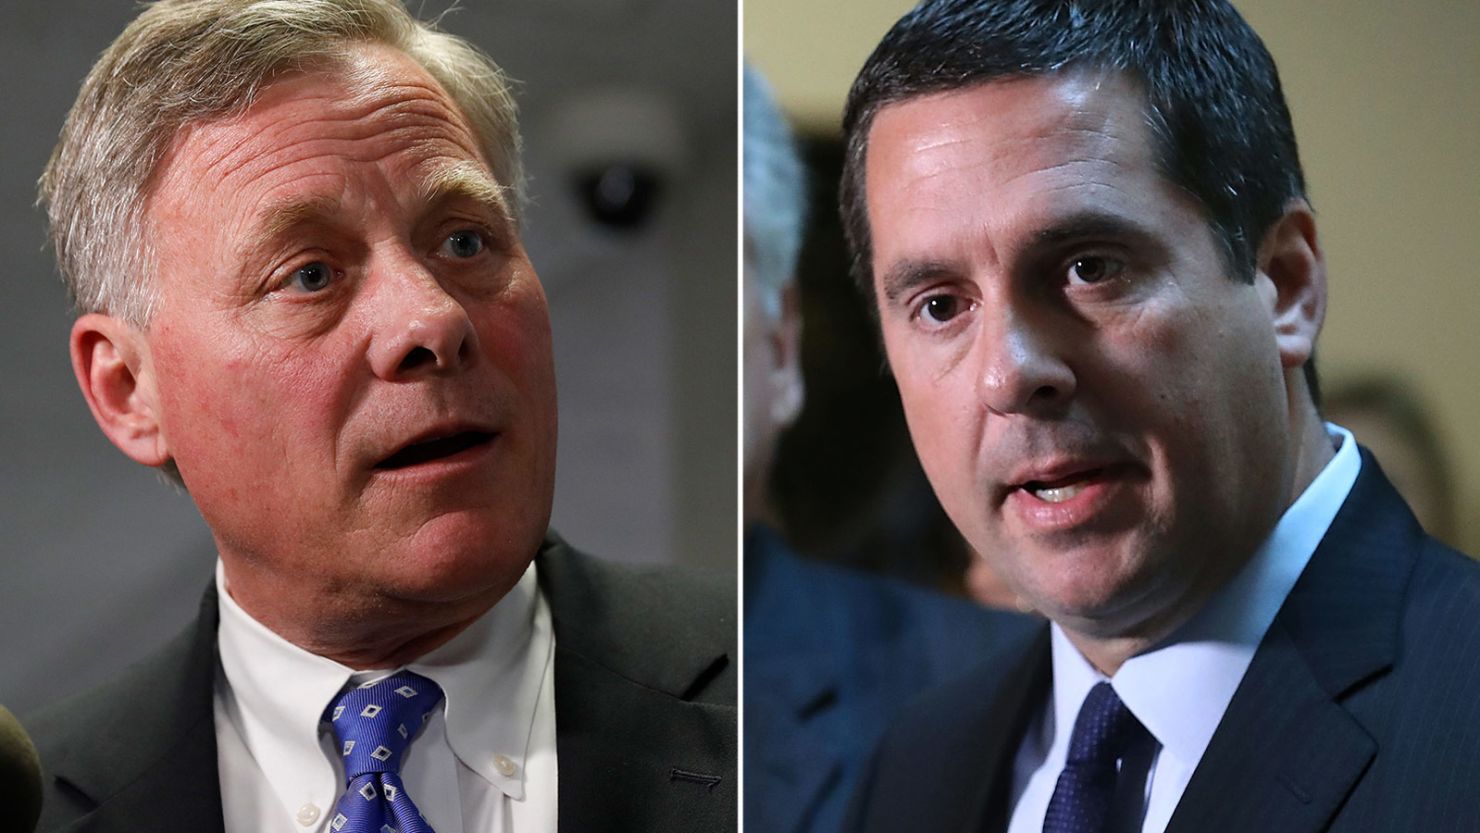 Senate Intelligence Committee Chairman Richard Burr, a North Carolina Republican, is pictured at left. House Intelligence Committee Chairman Devin Nunes, a California Republican, is pictured at right. 